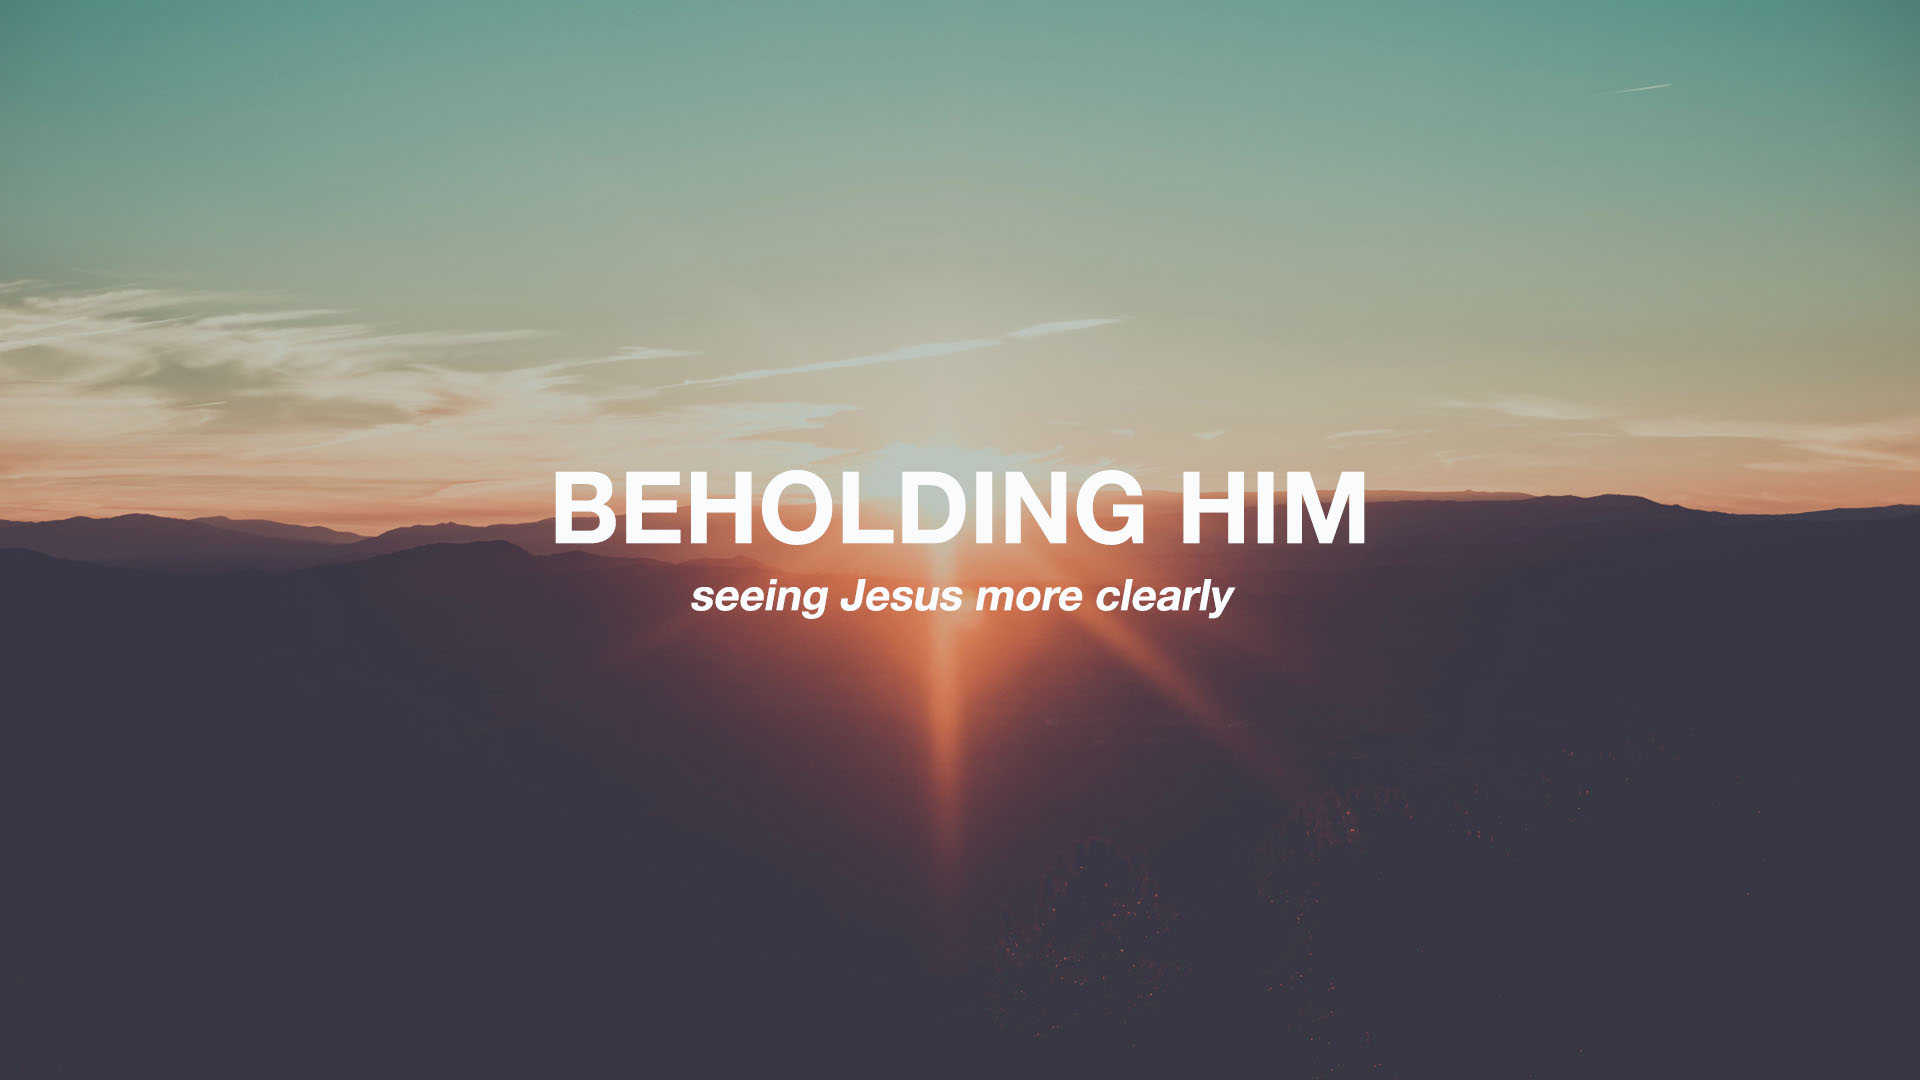 Beholding Him
seeing Jesus more clearly